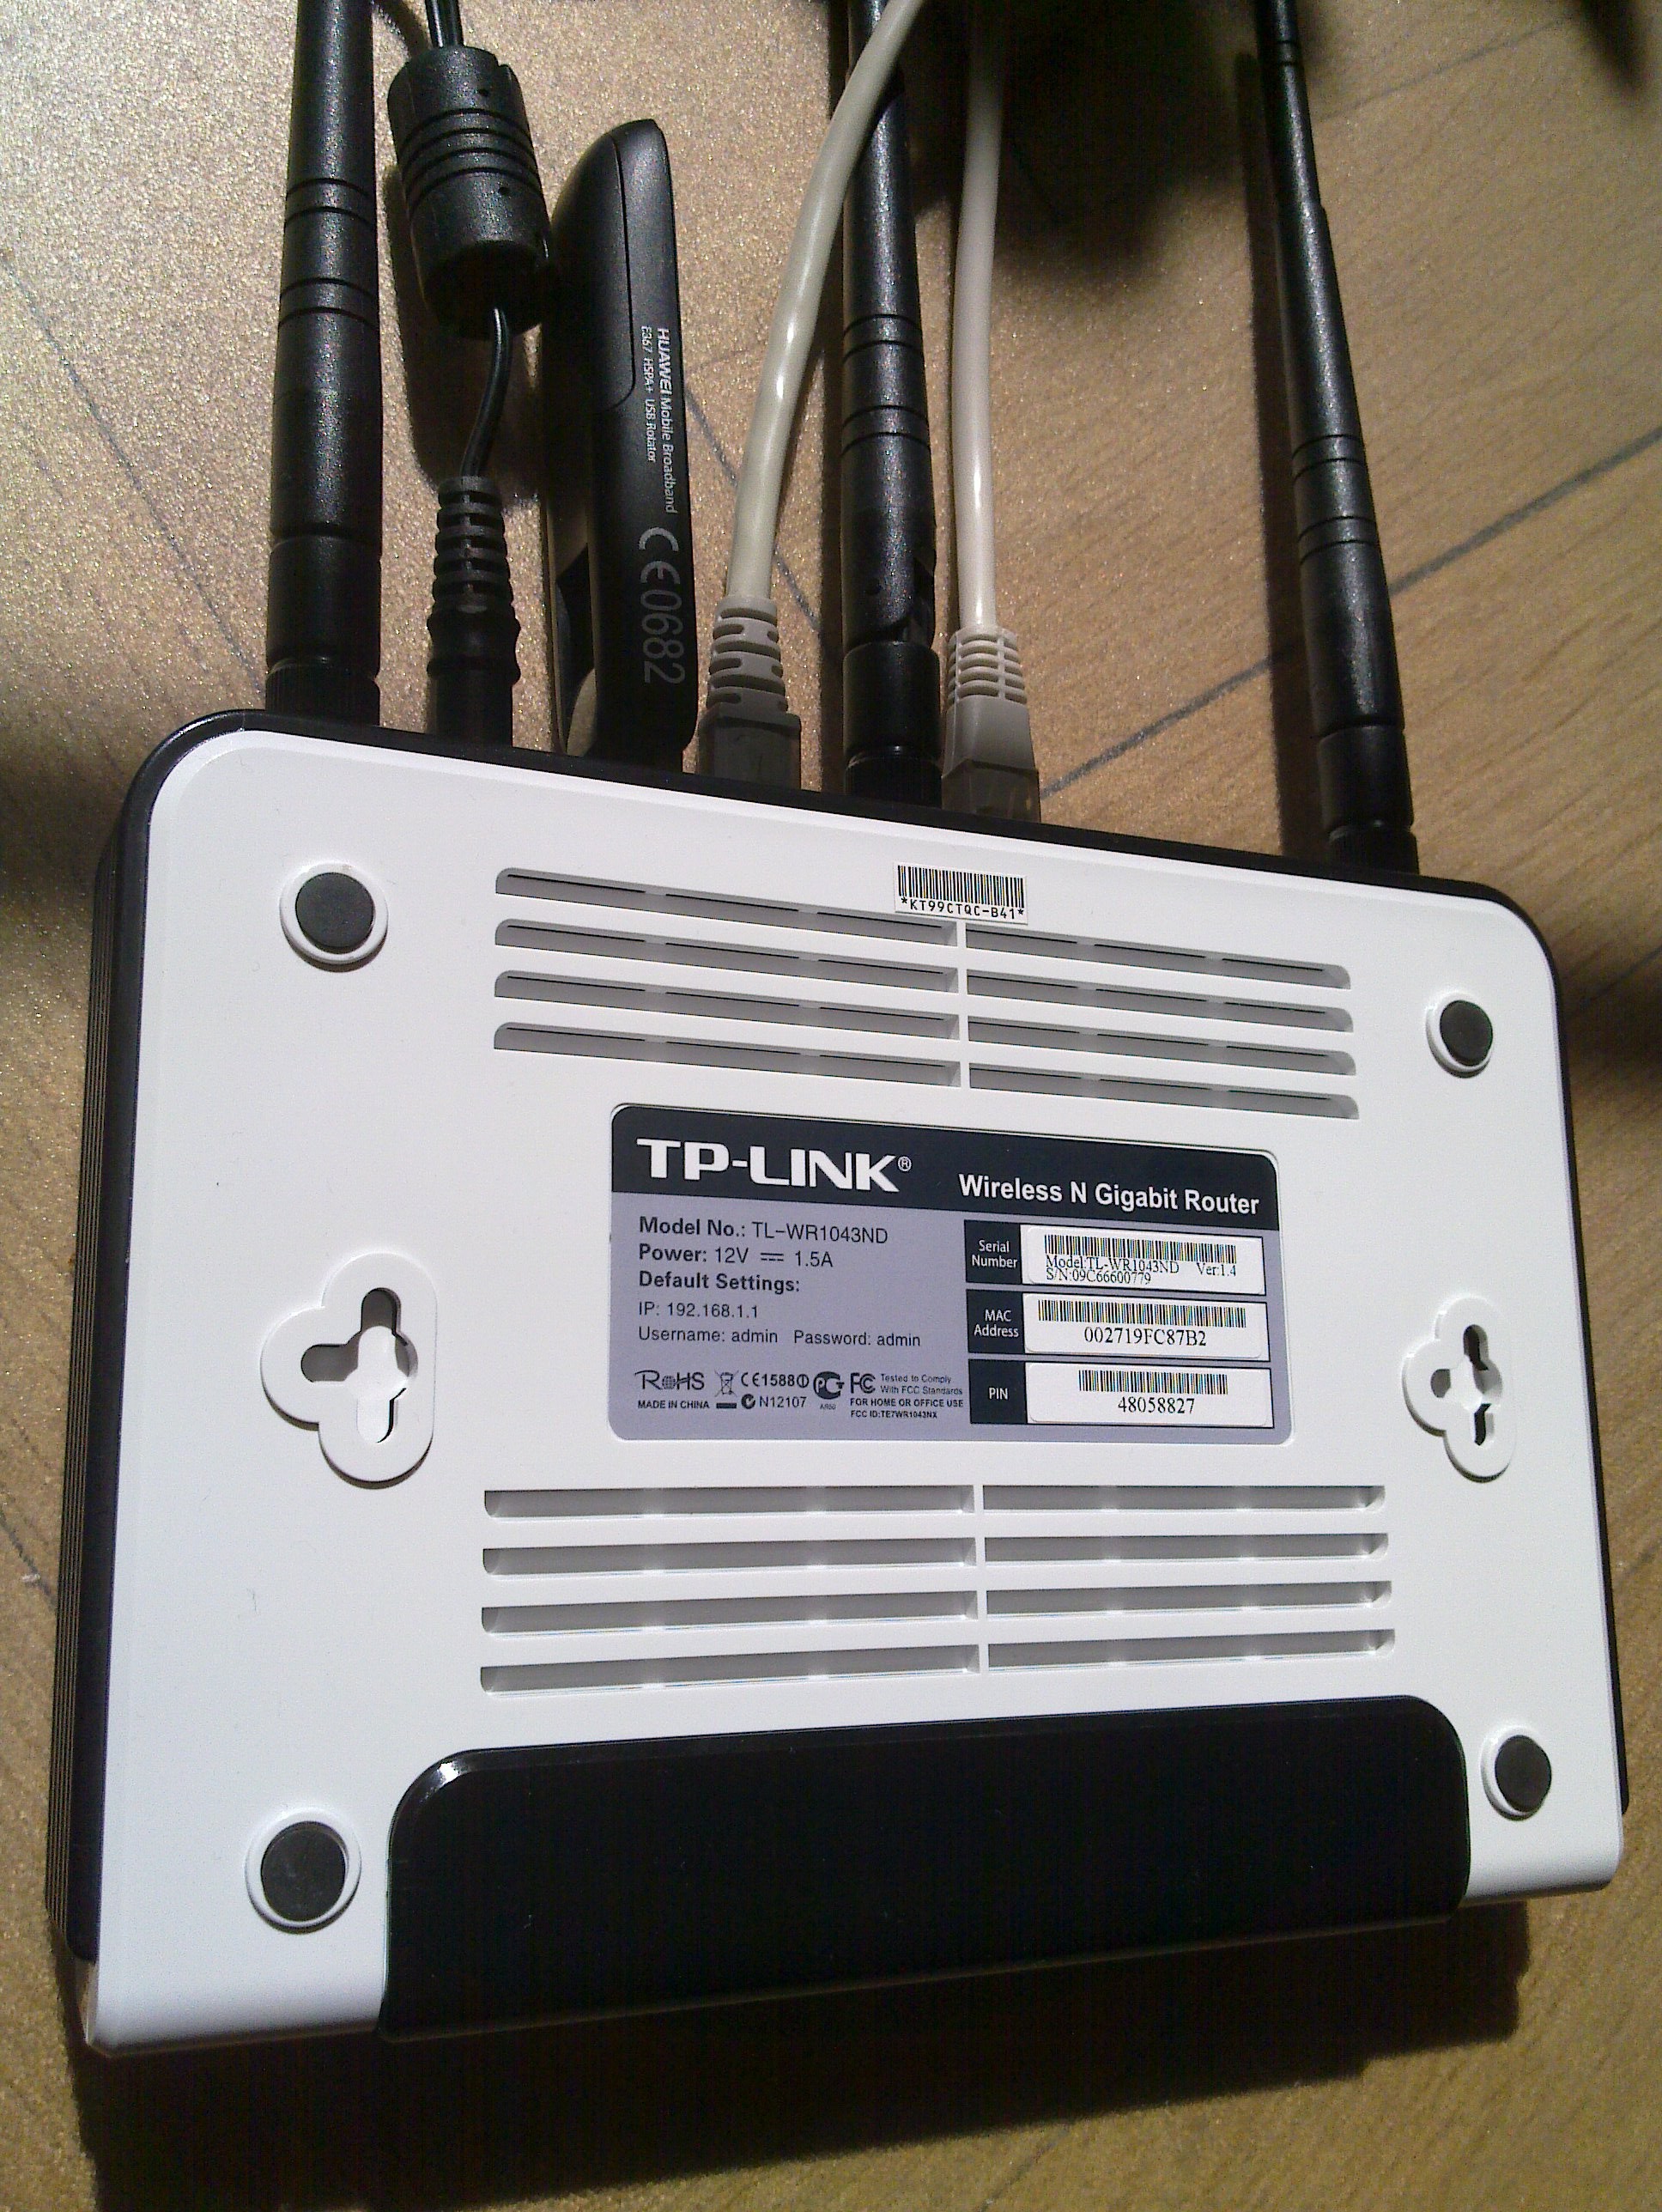 horisont Grape mikroskop OpenWRT with Huawei E367 and TP-Link TL-WR1043ND – Simon Josefsson's blog